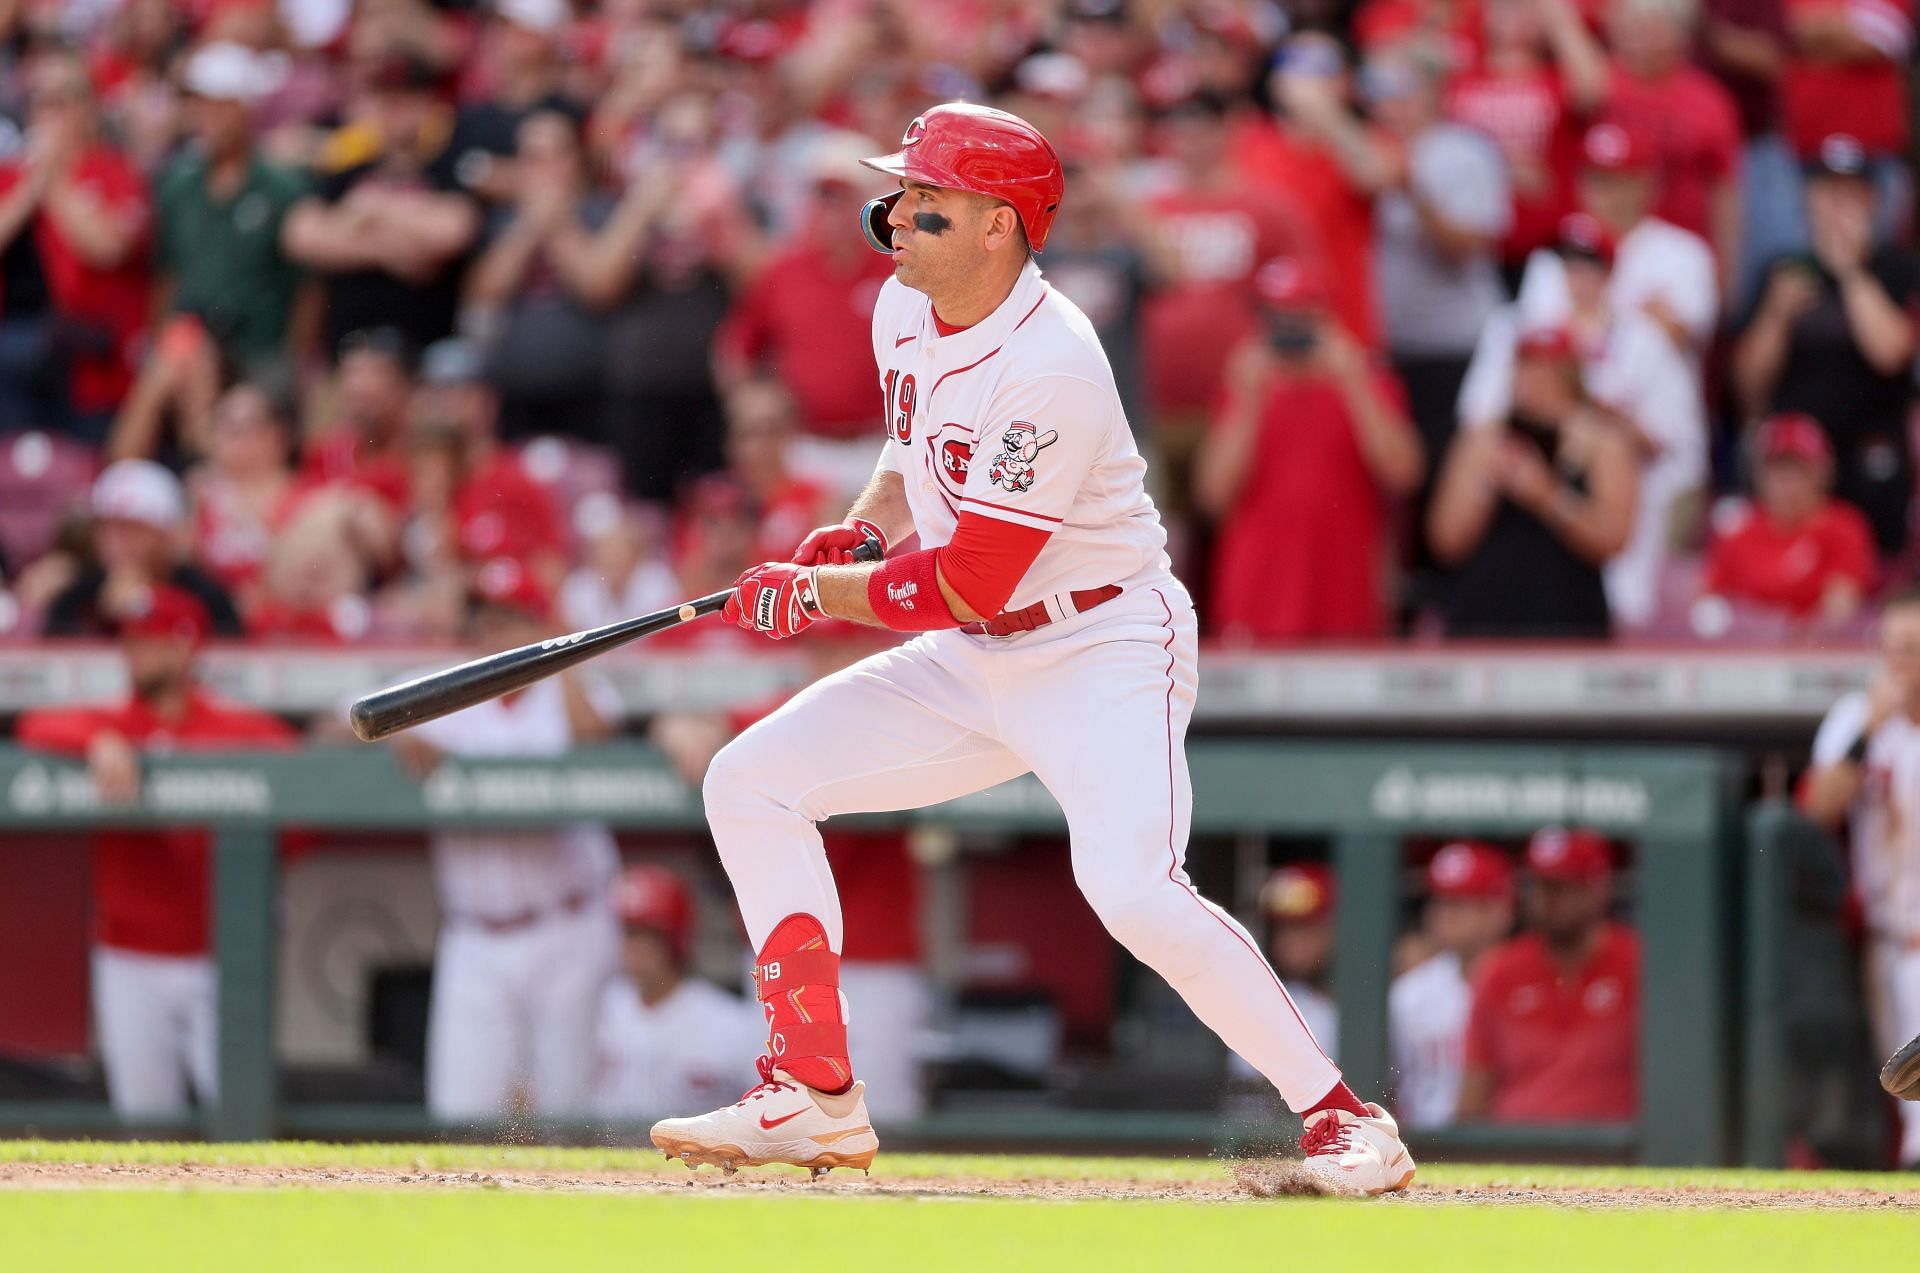 Despite his impressive track record, Joey Votto now faces free agency and the realities of aging and recent injuries.